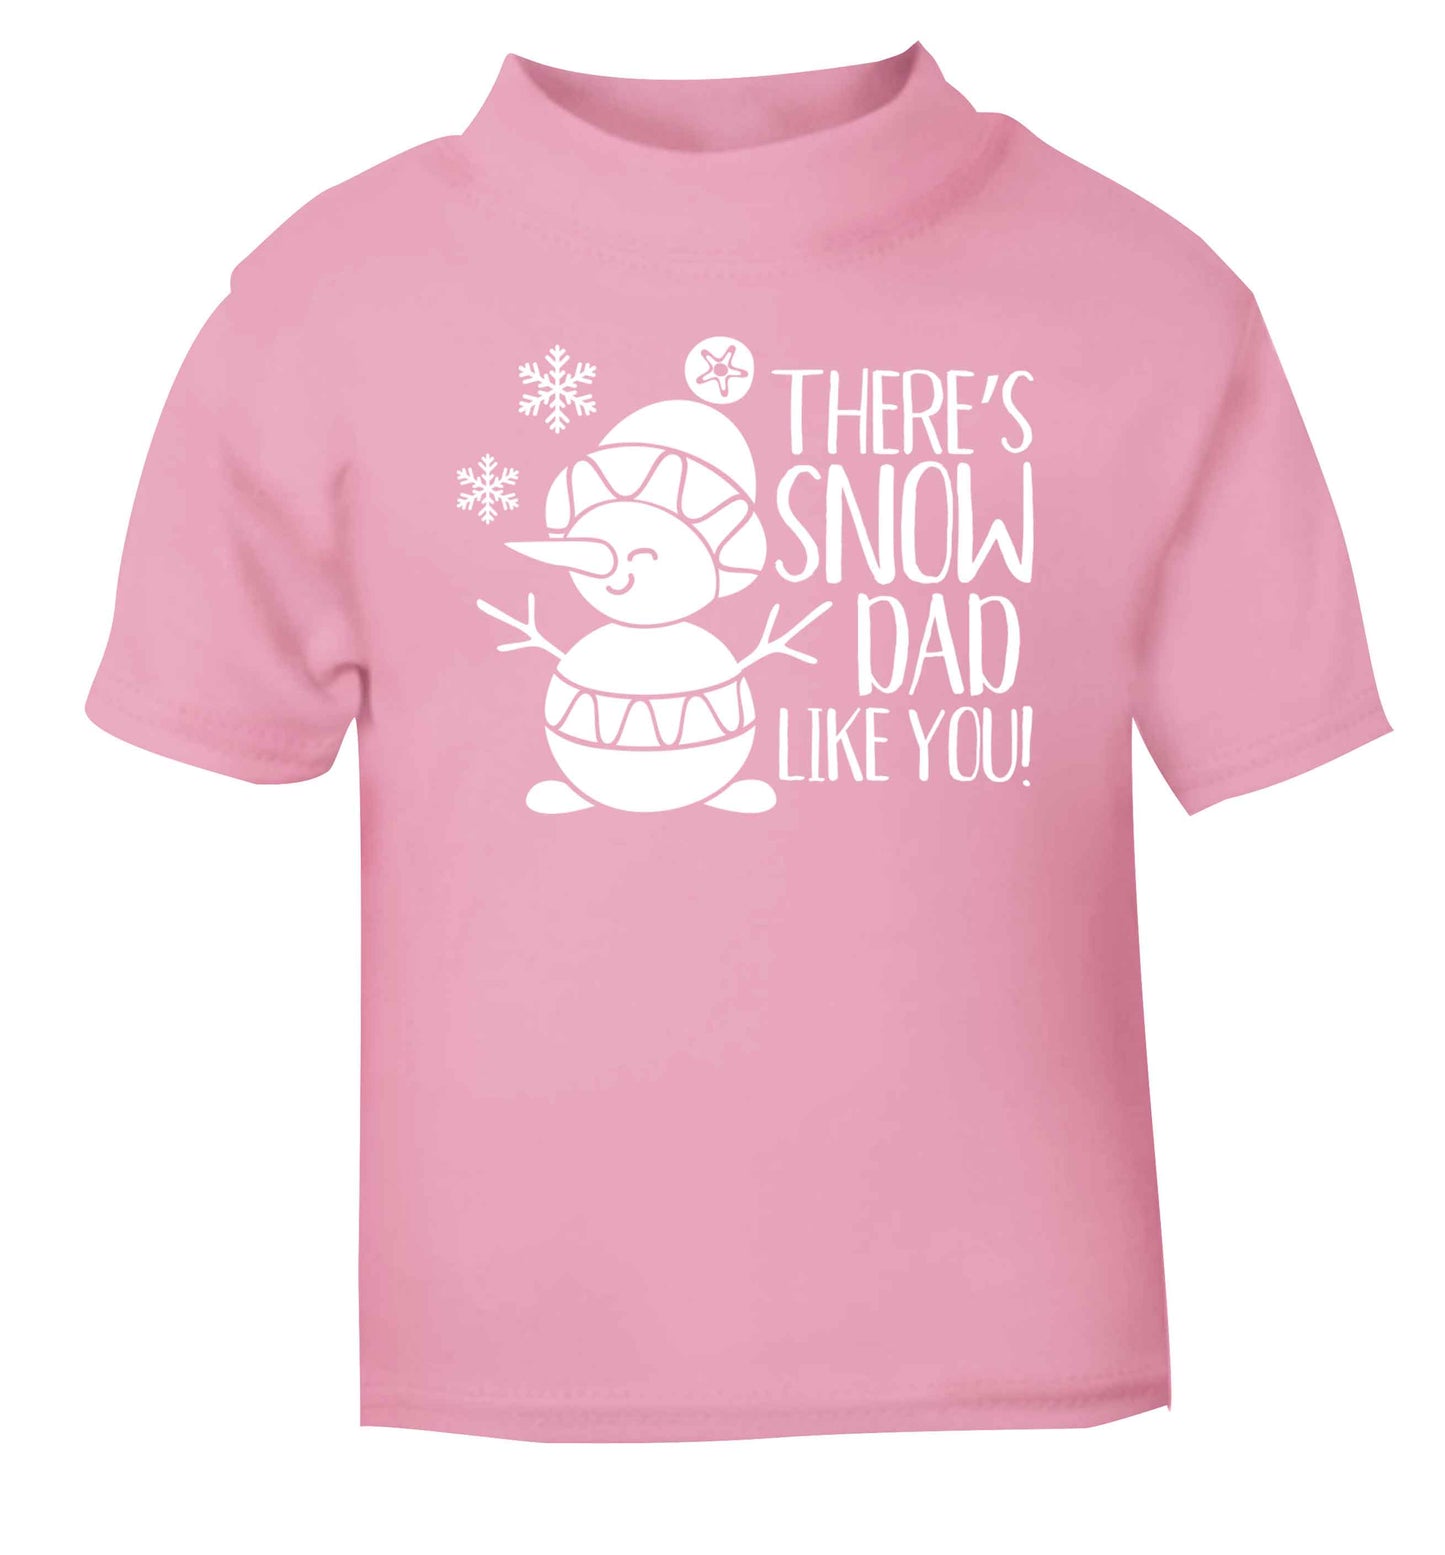 There's snow dad like you light pink baby toddler Tshirt 2 Years